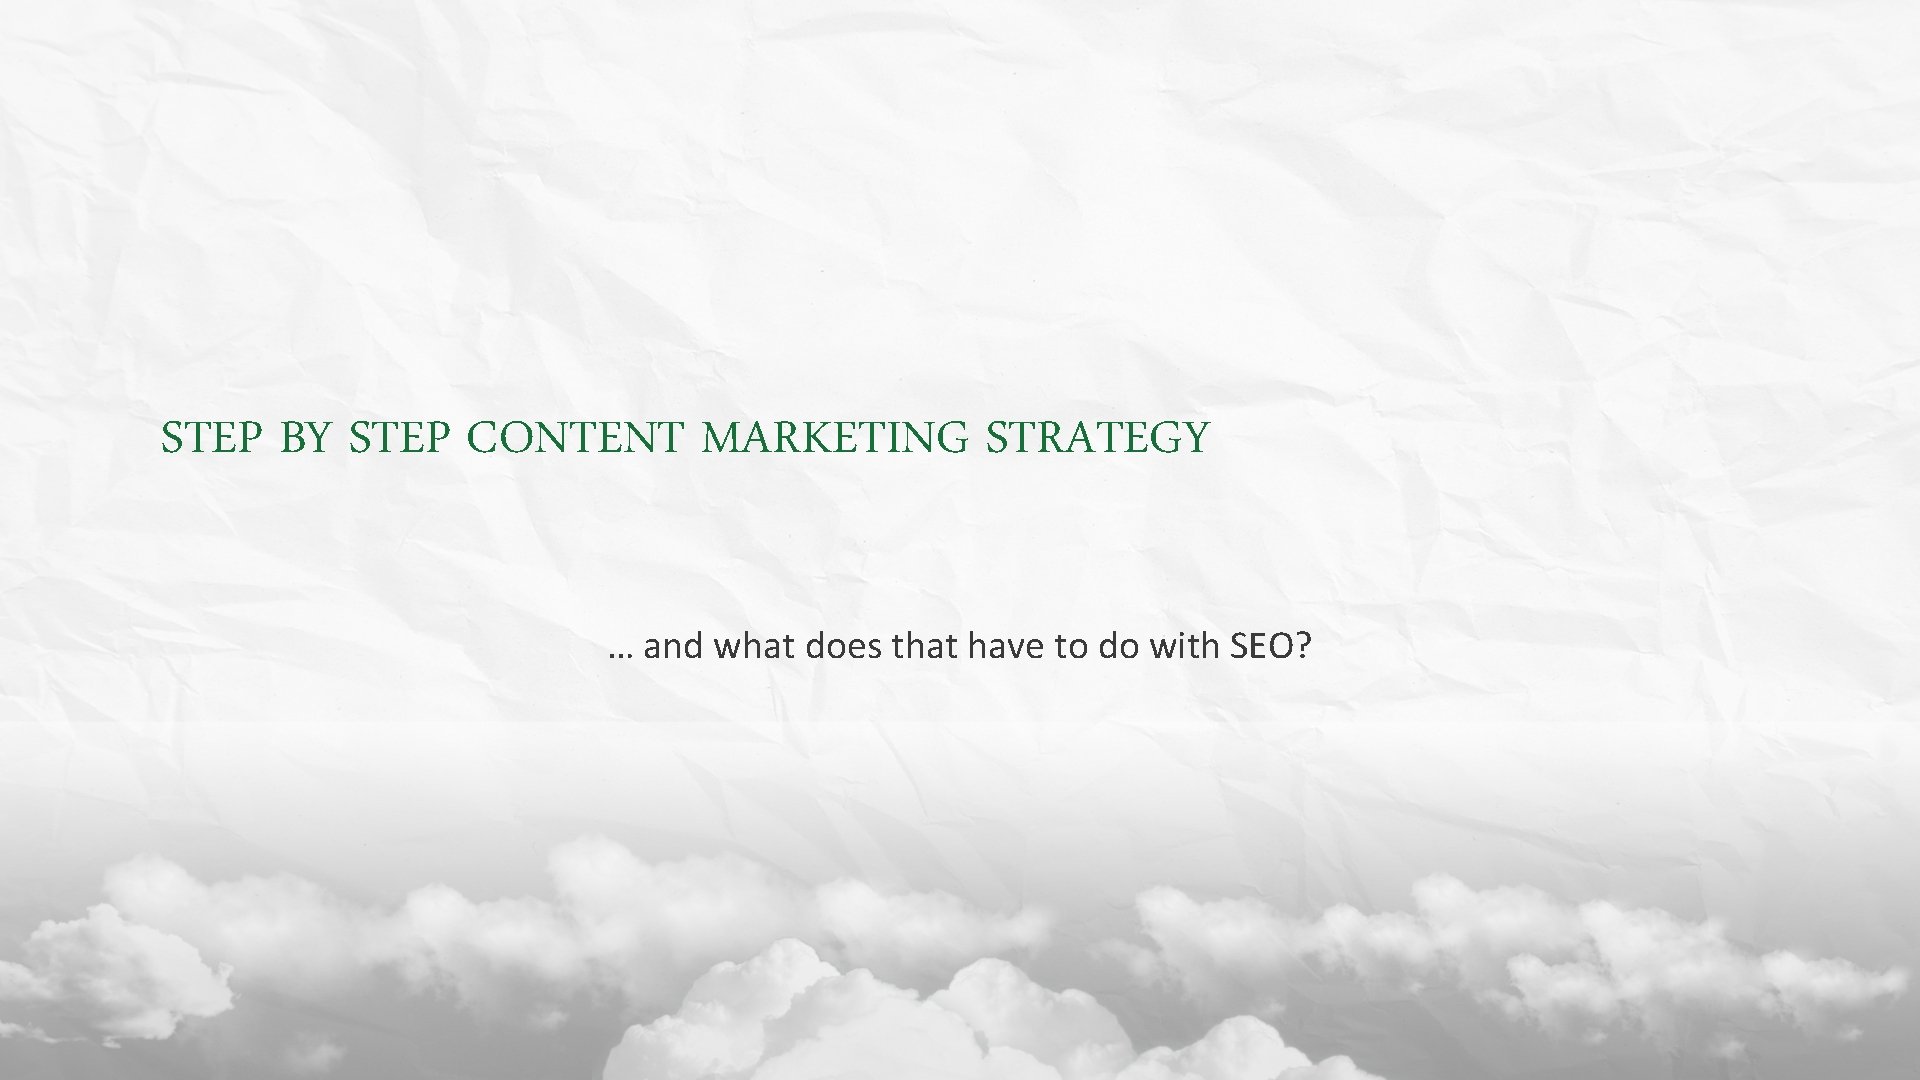 STEP BY STEP CONTENT MARKETING STRATEGY … and what does that have to do